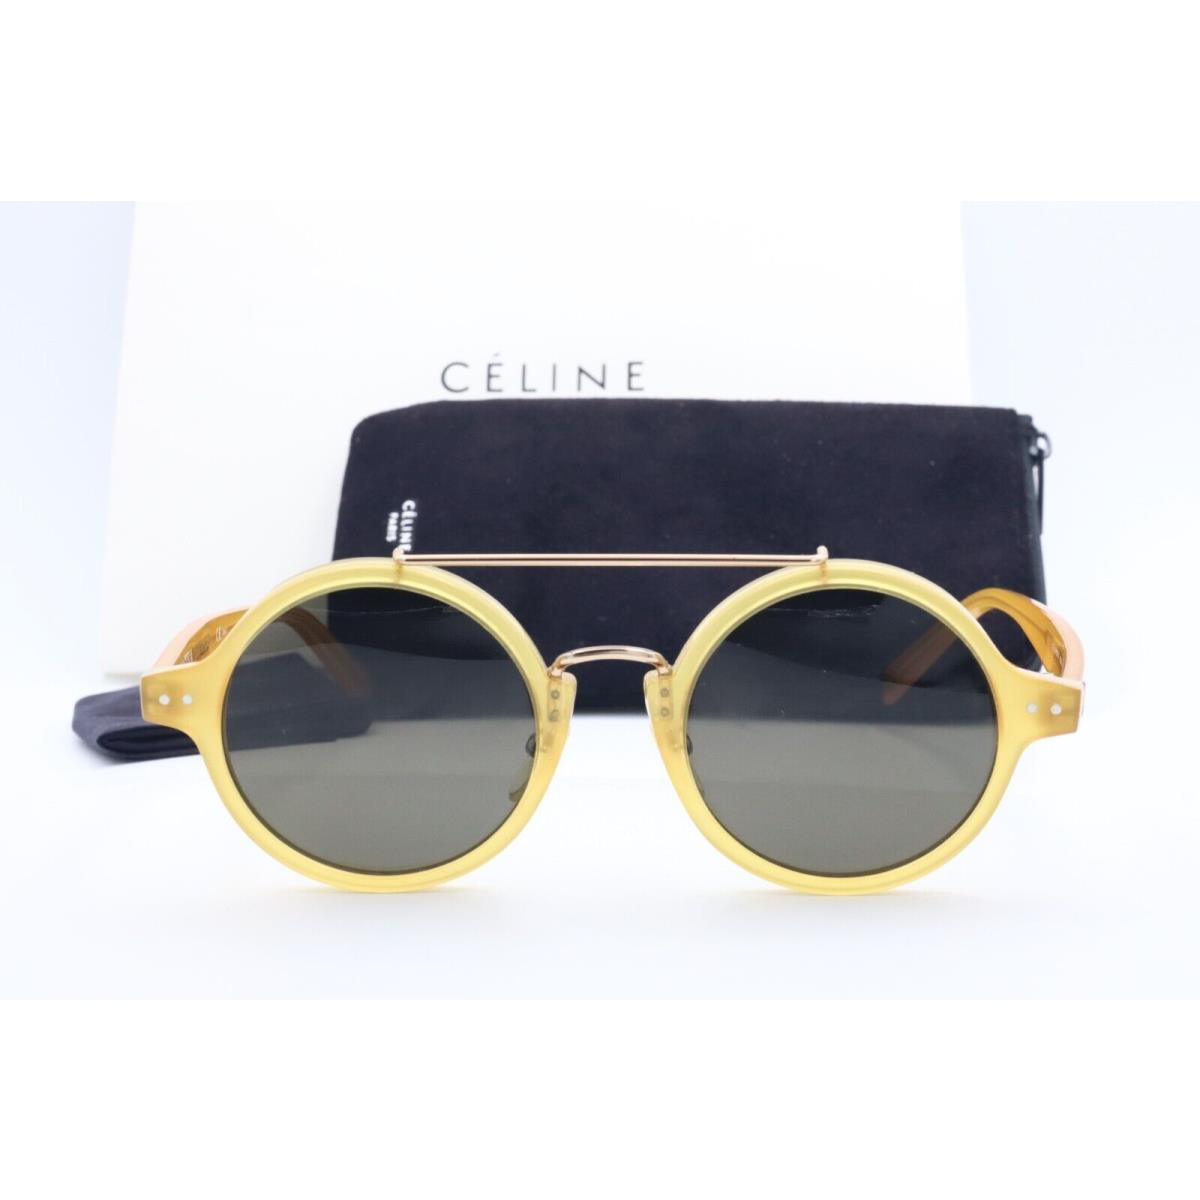 Celine CL 41442 F/s PD970 Round Sunglasses Whiskey / Gray Lens